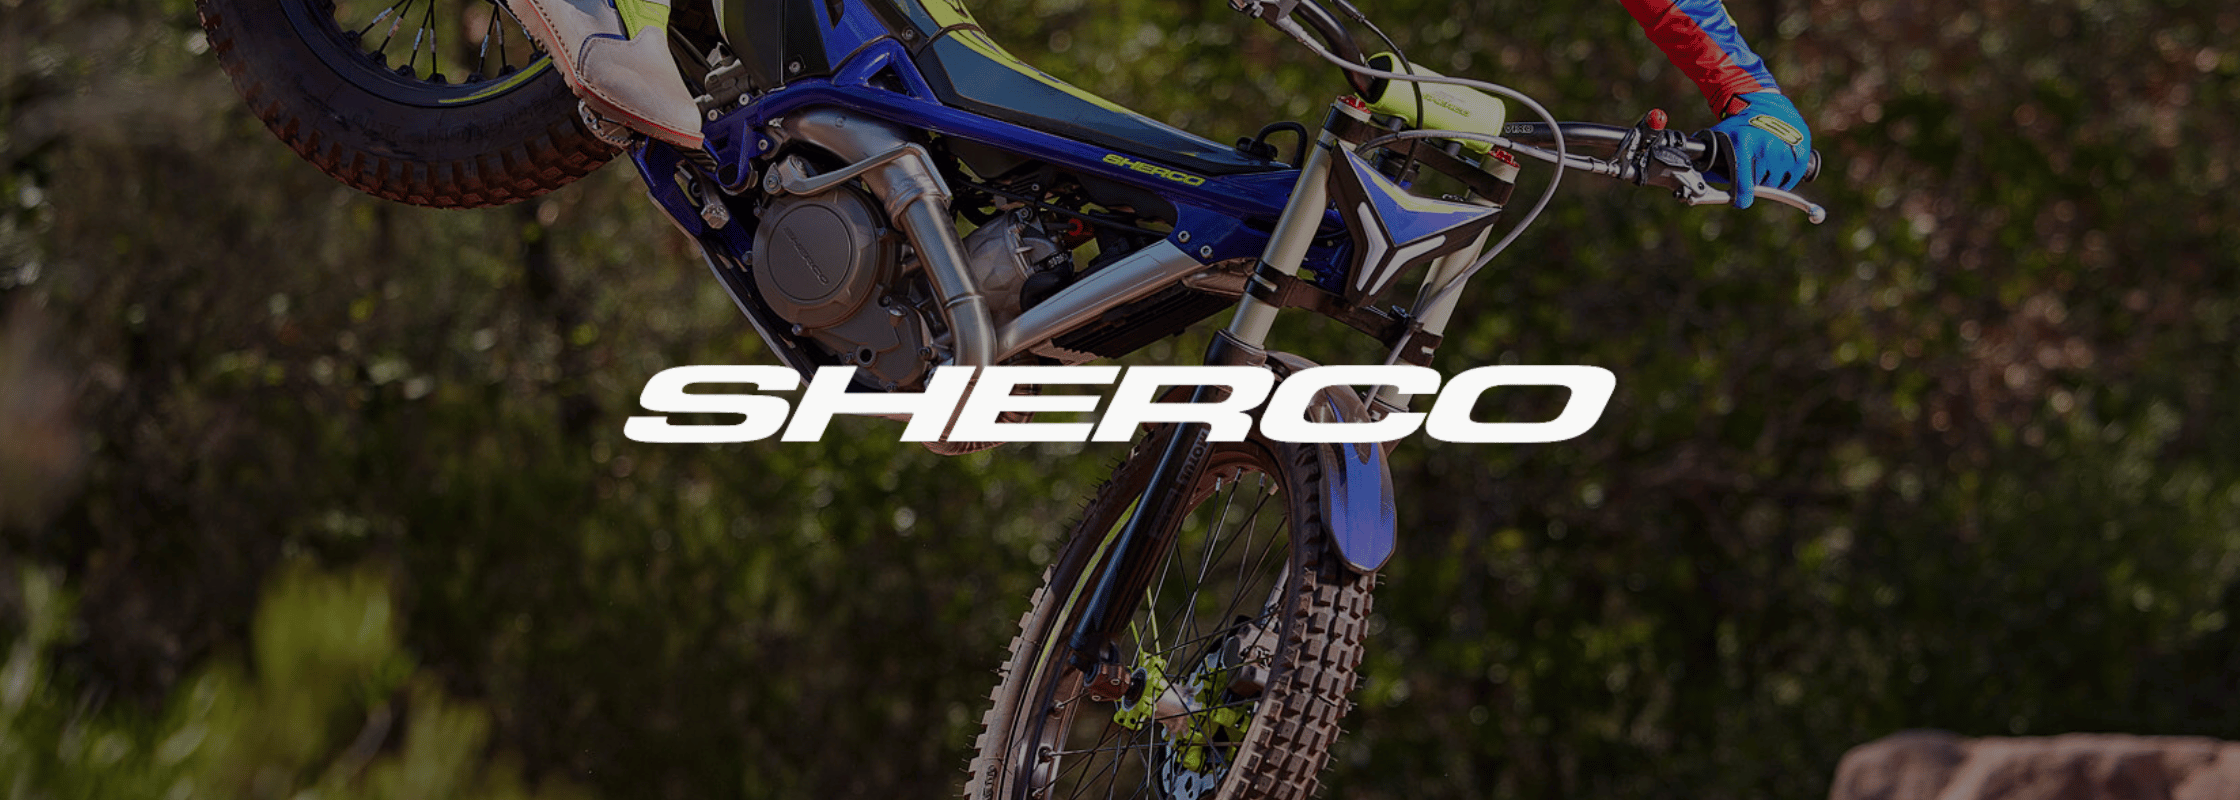 Sherco Trials Bikes for Sale Barnsley South Yorkshire